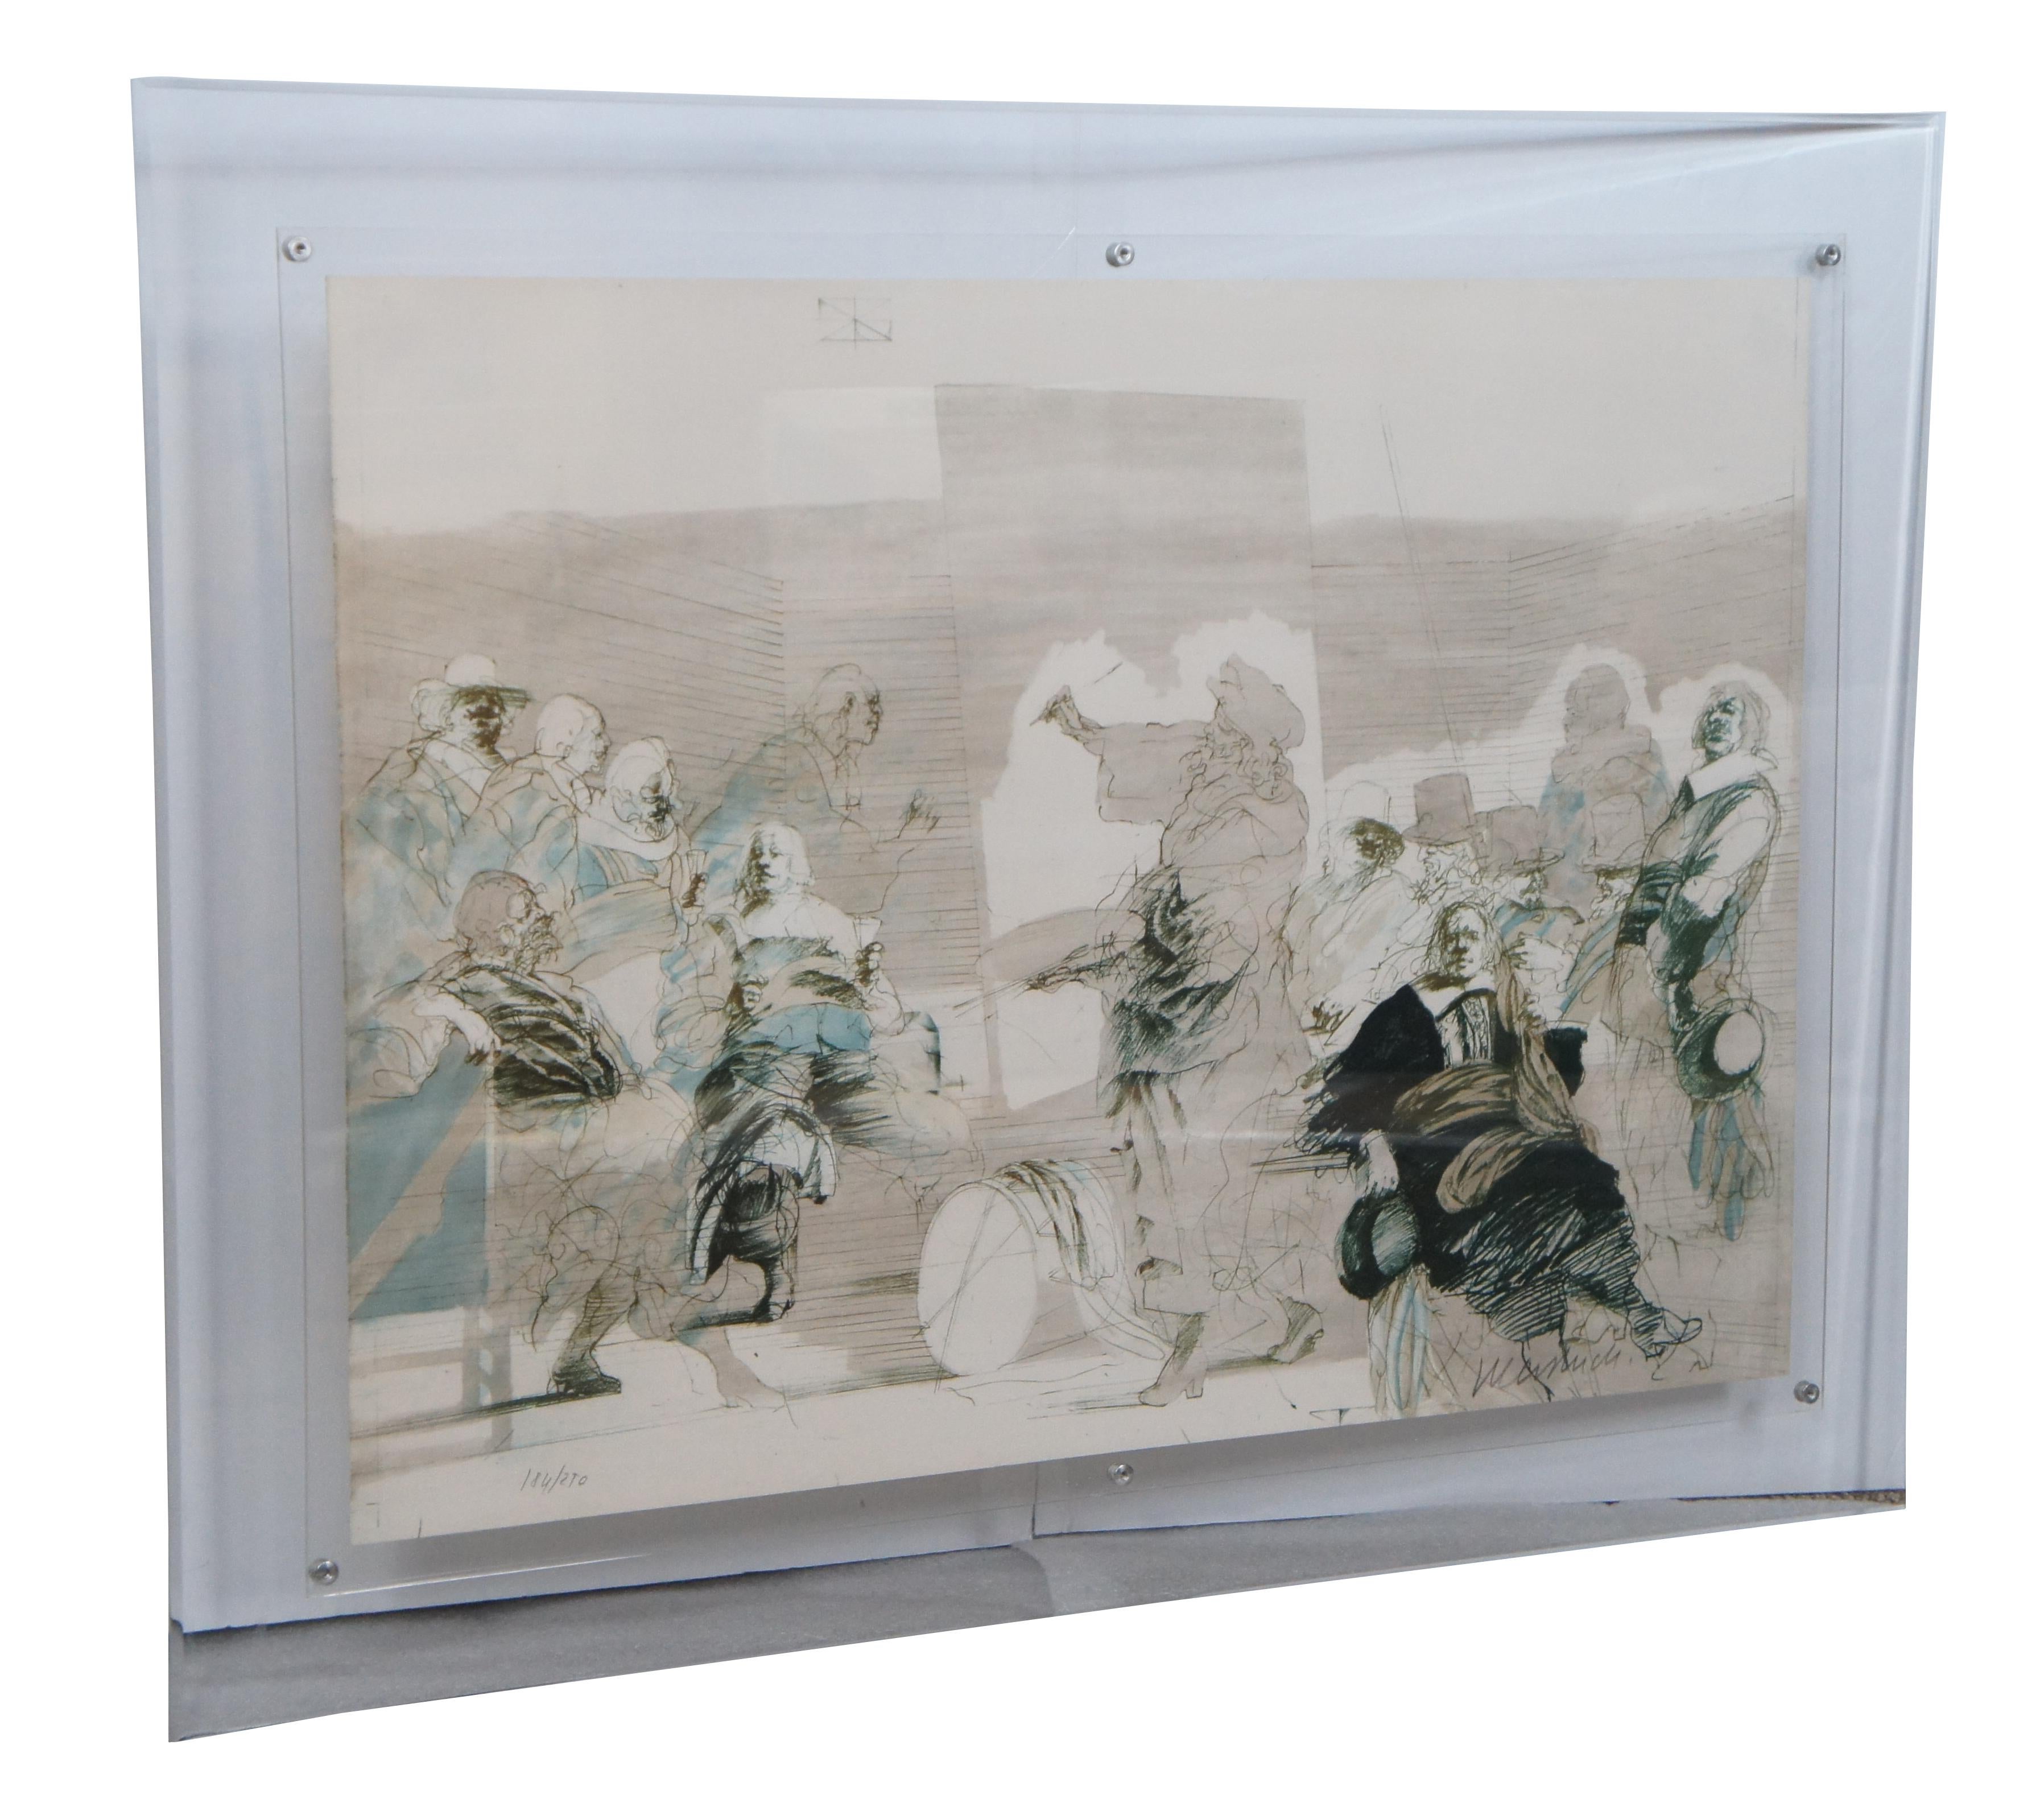 Vintage Renaissance Sketch Lithograph of Scholars Philosophers Acrylic Frame In Good Condition For Sale In Dayton, OH